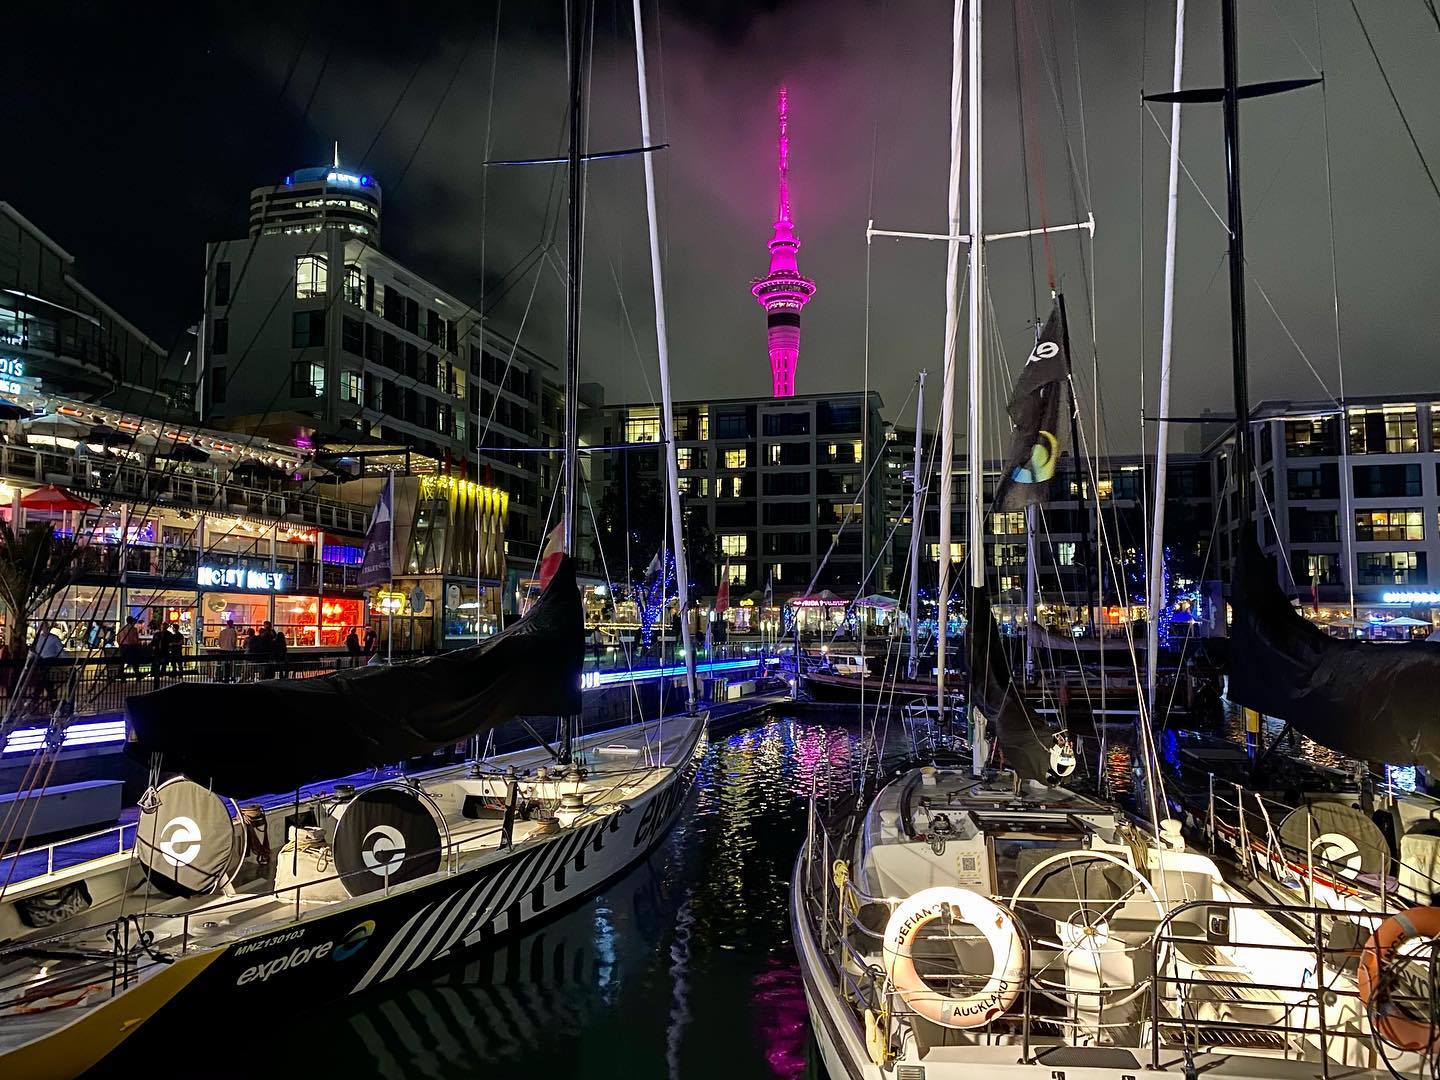 New Zealand itinerary for winter activities 2023 - Viaduct Harbour night